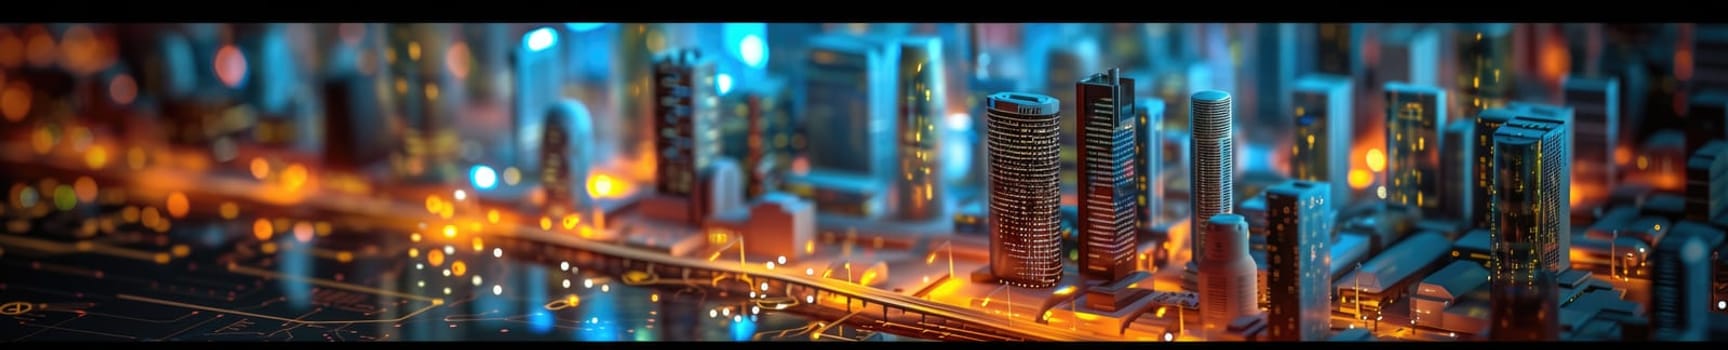 A conceptual visualization of a smart city with glowing structures on a digital circuit board, symbolizing urban technology integration concept. AIG41